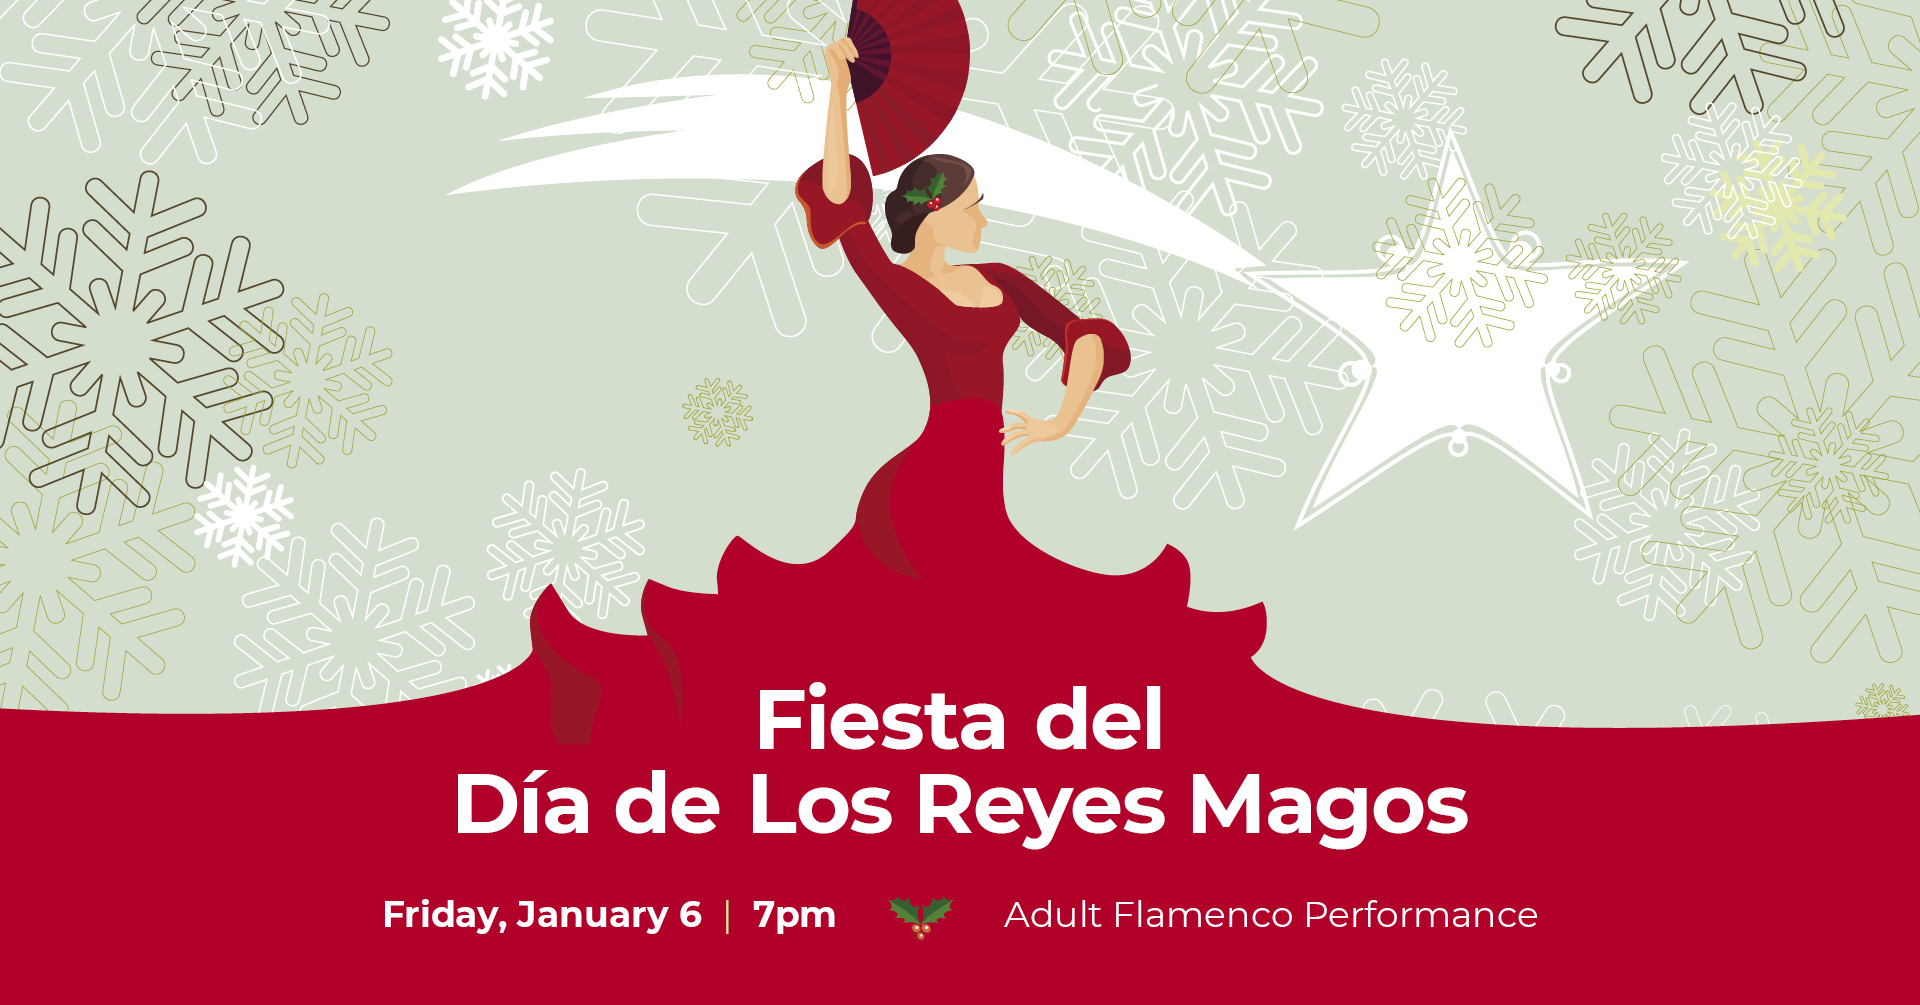 Celebrate the end of the holiday season with an afternoon of Flamenco dance.